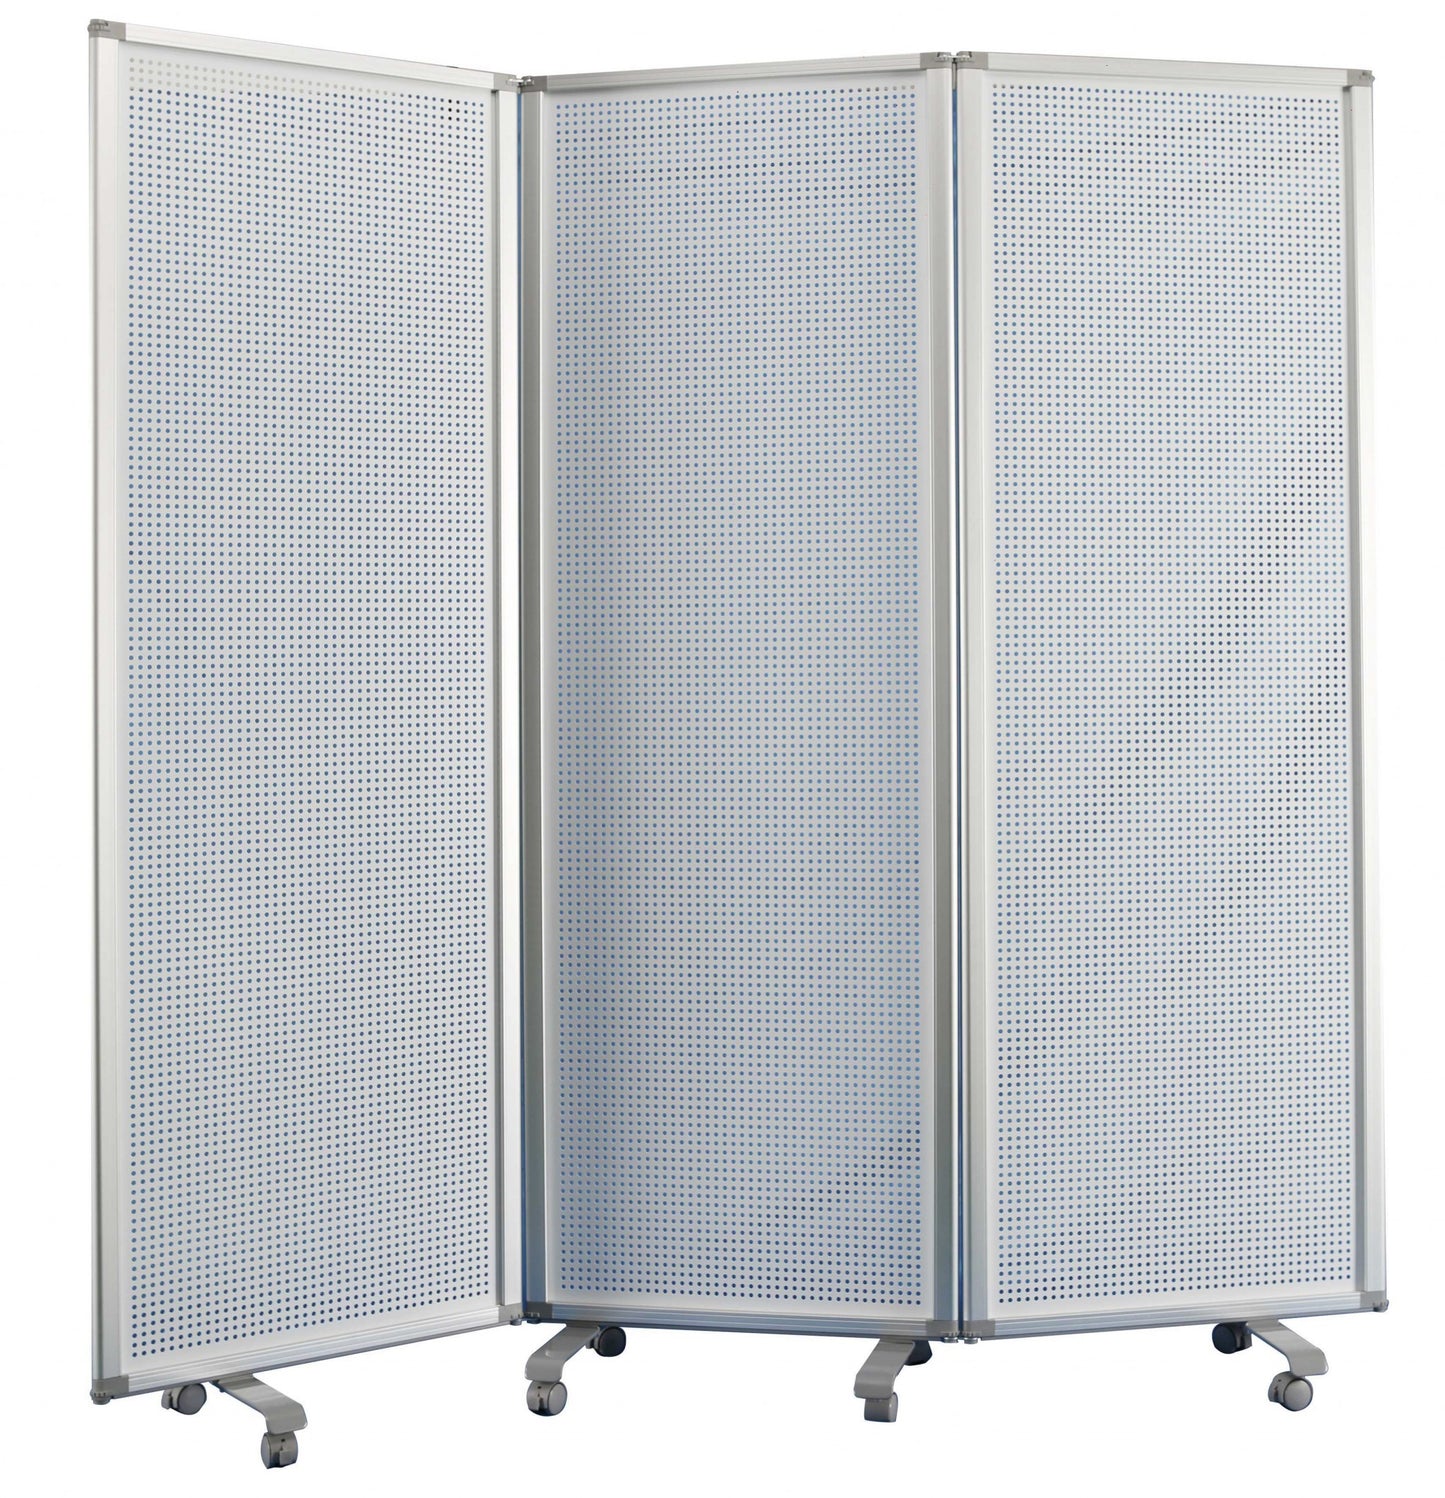 71" x 1" x 71" White, Metal And Alloy - Screen